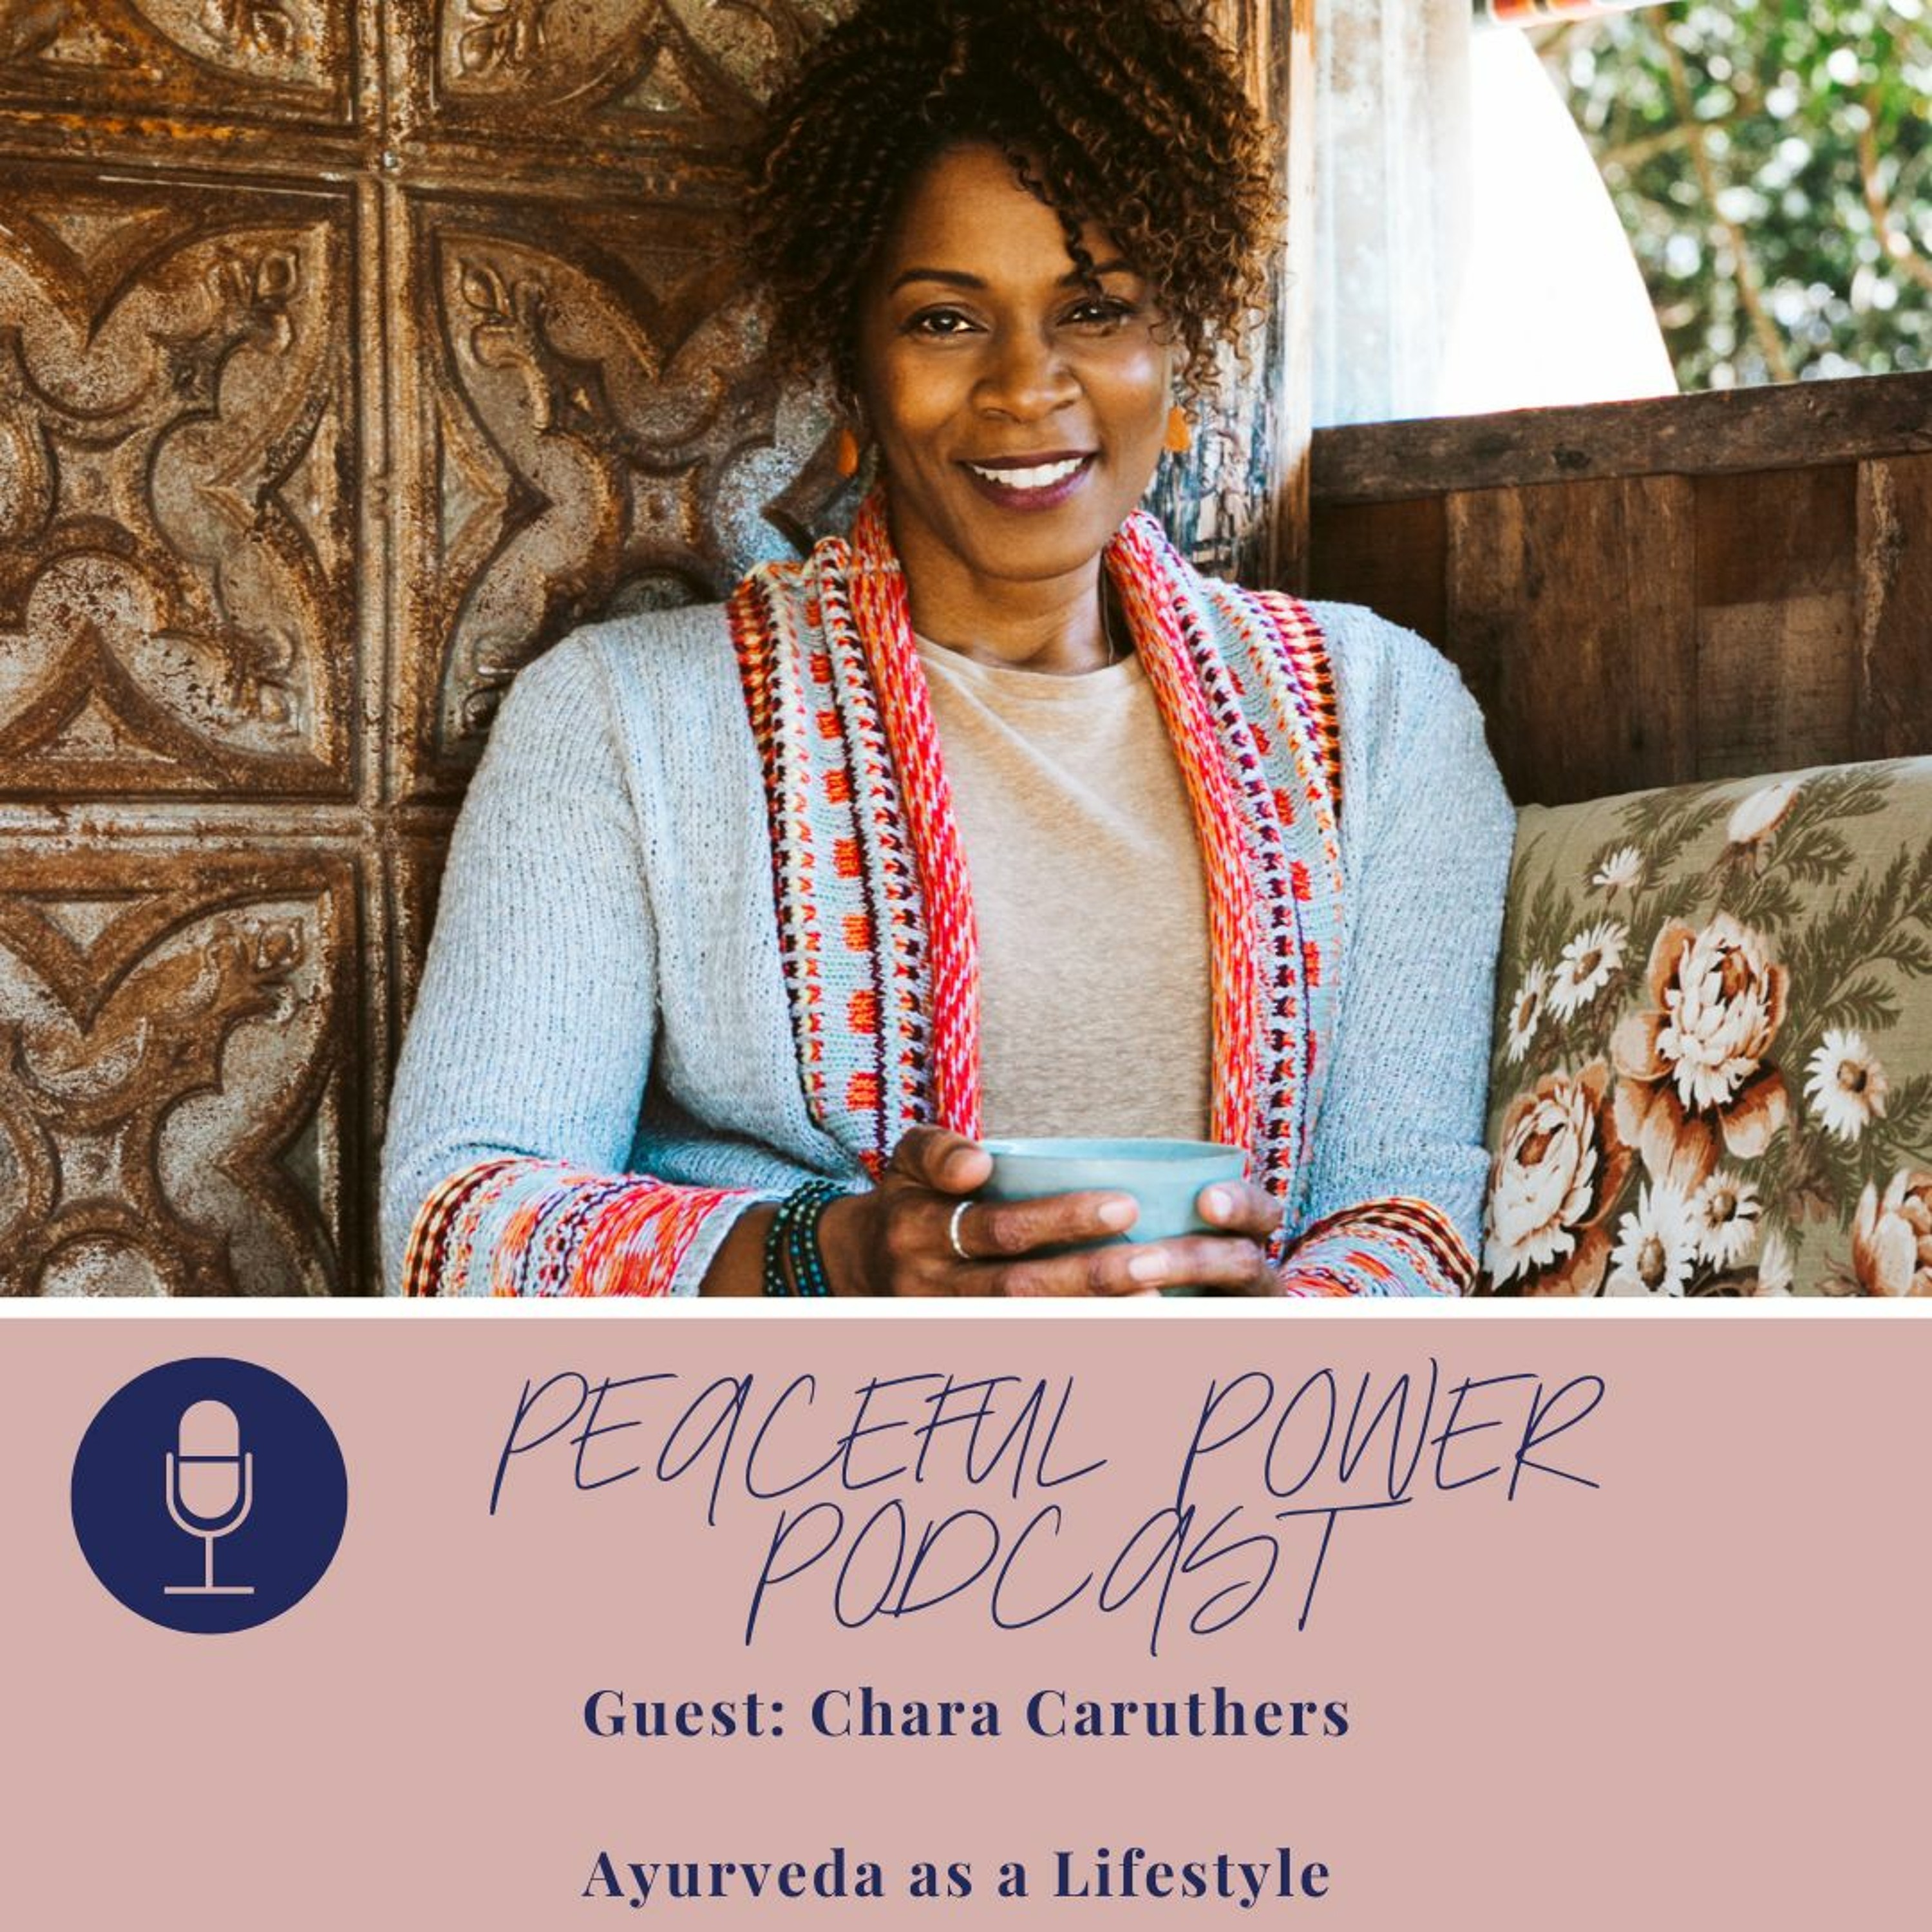 Chara Caruthers on Living an Ayurvedic Lifestyle